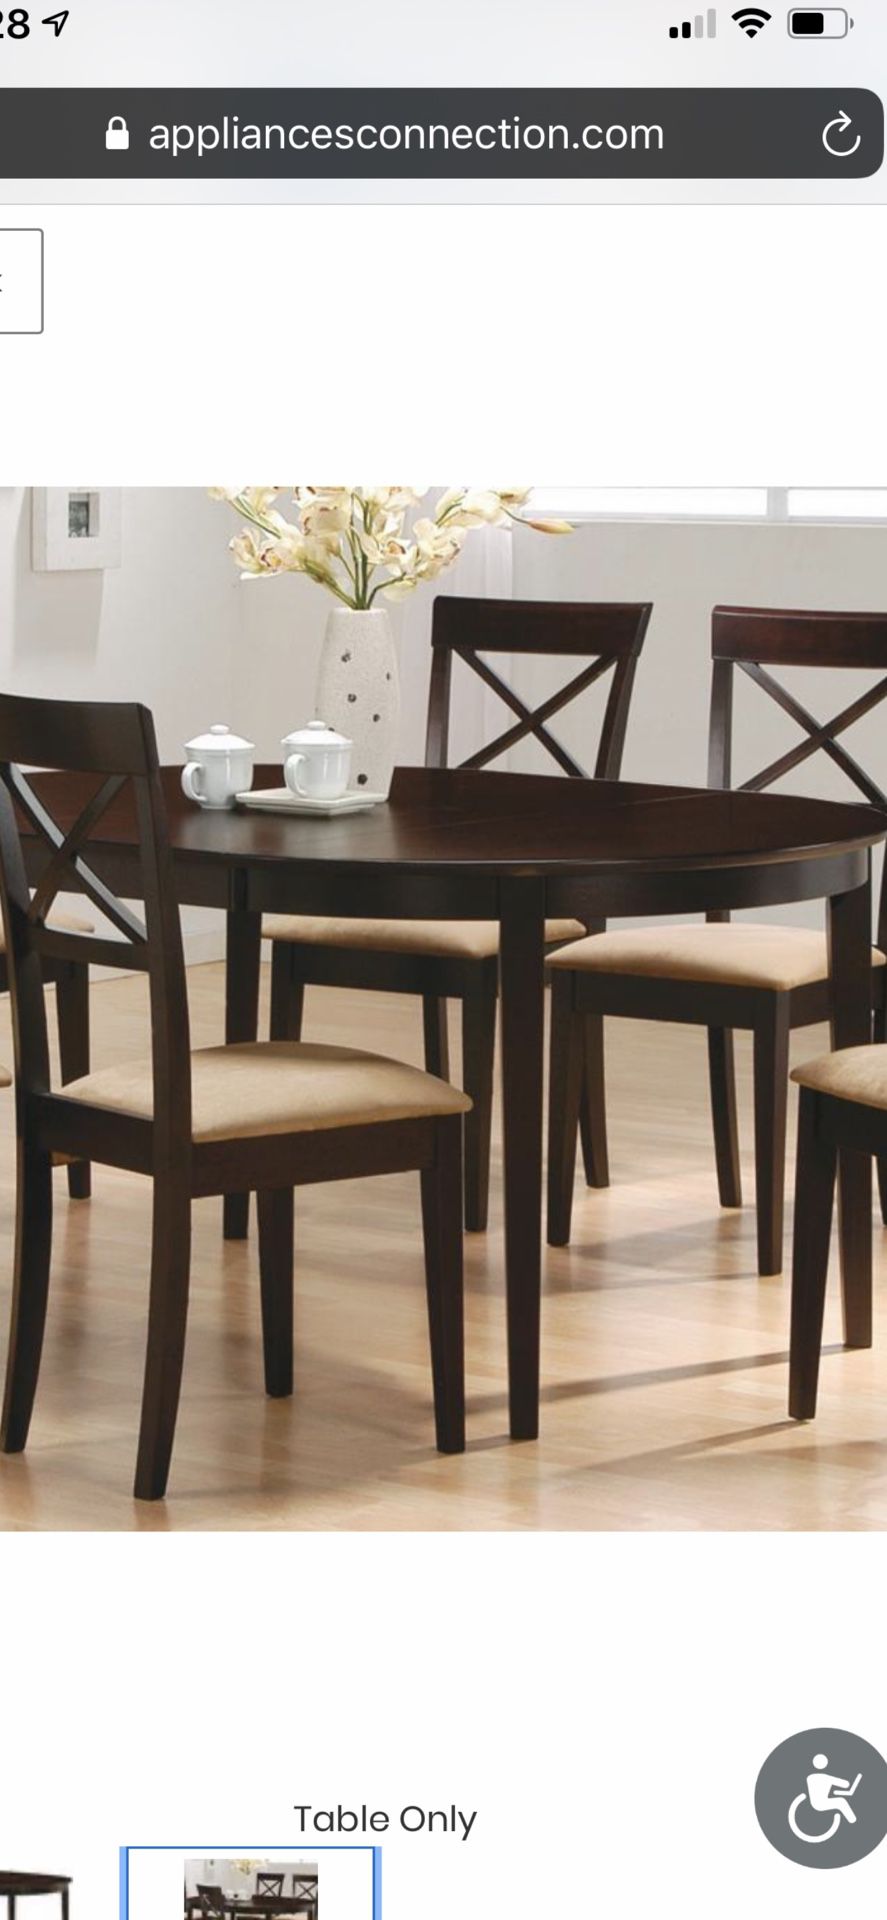 BRAND NEW! STILL IN BOX! Cappuccino Dining Table- Chairs not included